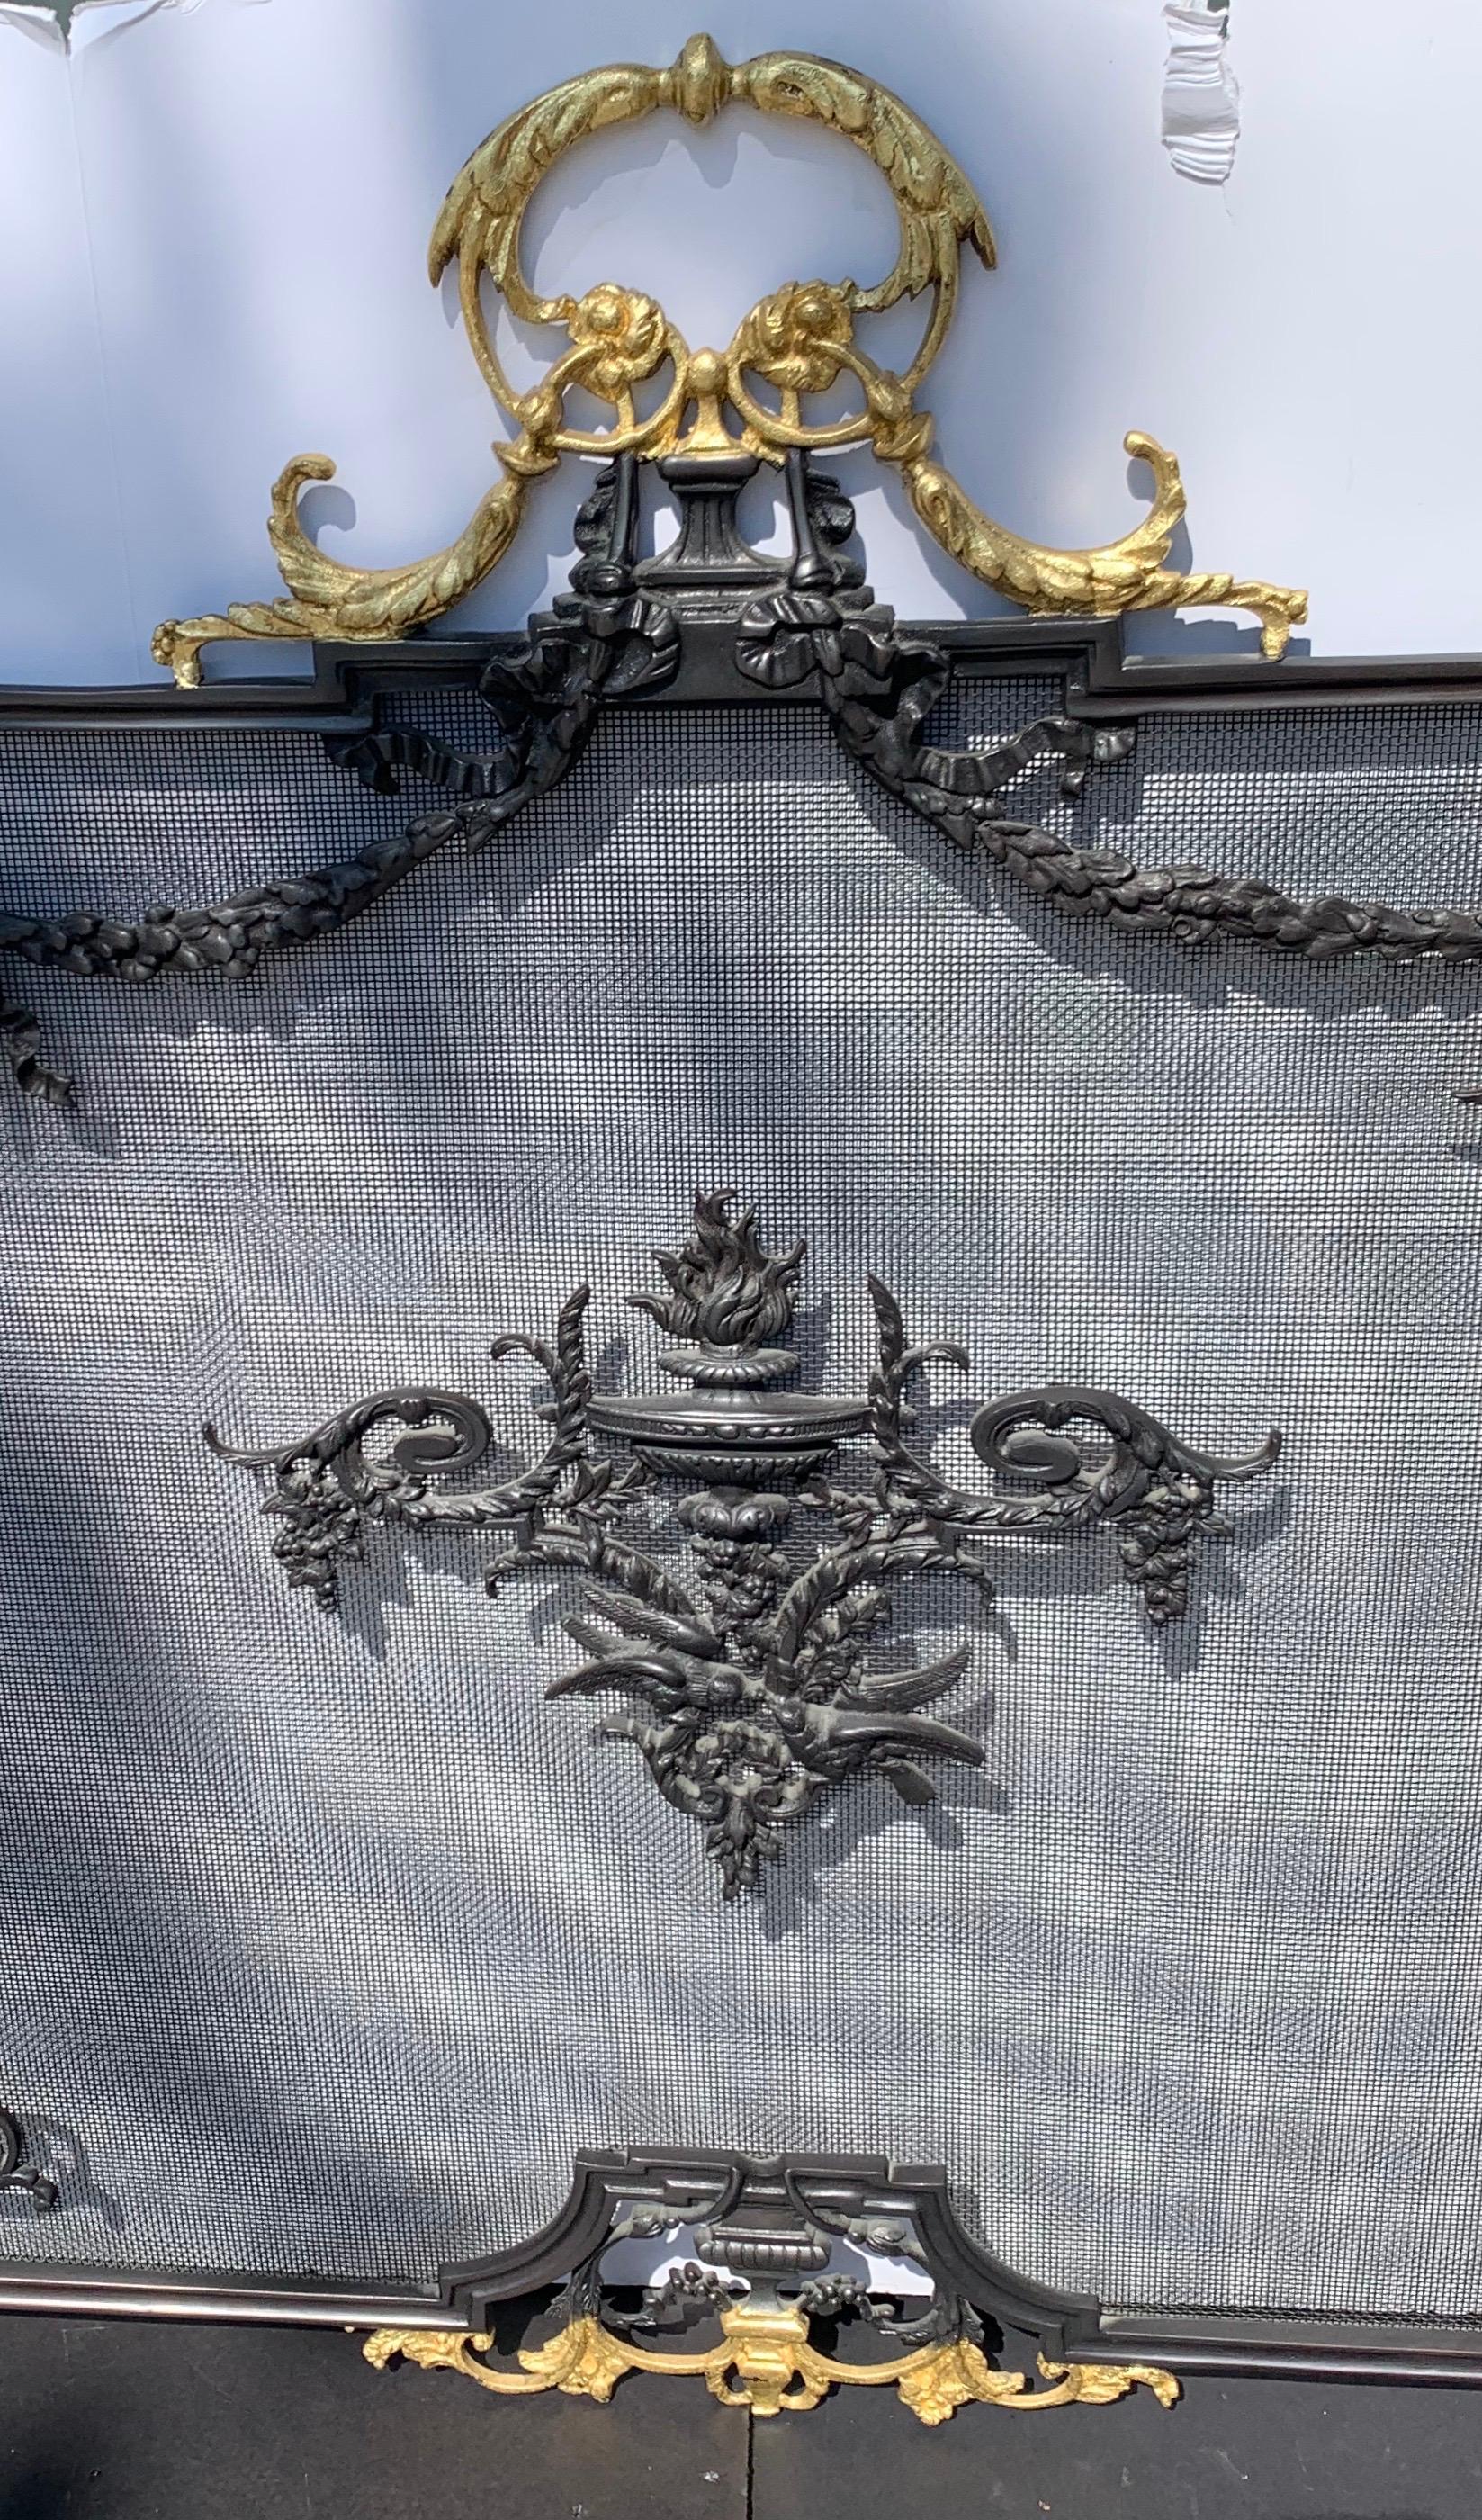 A wonderful Regency / neoclassical French gilt and patinated two toned bronze Empire fireplace screen.